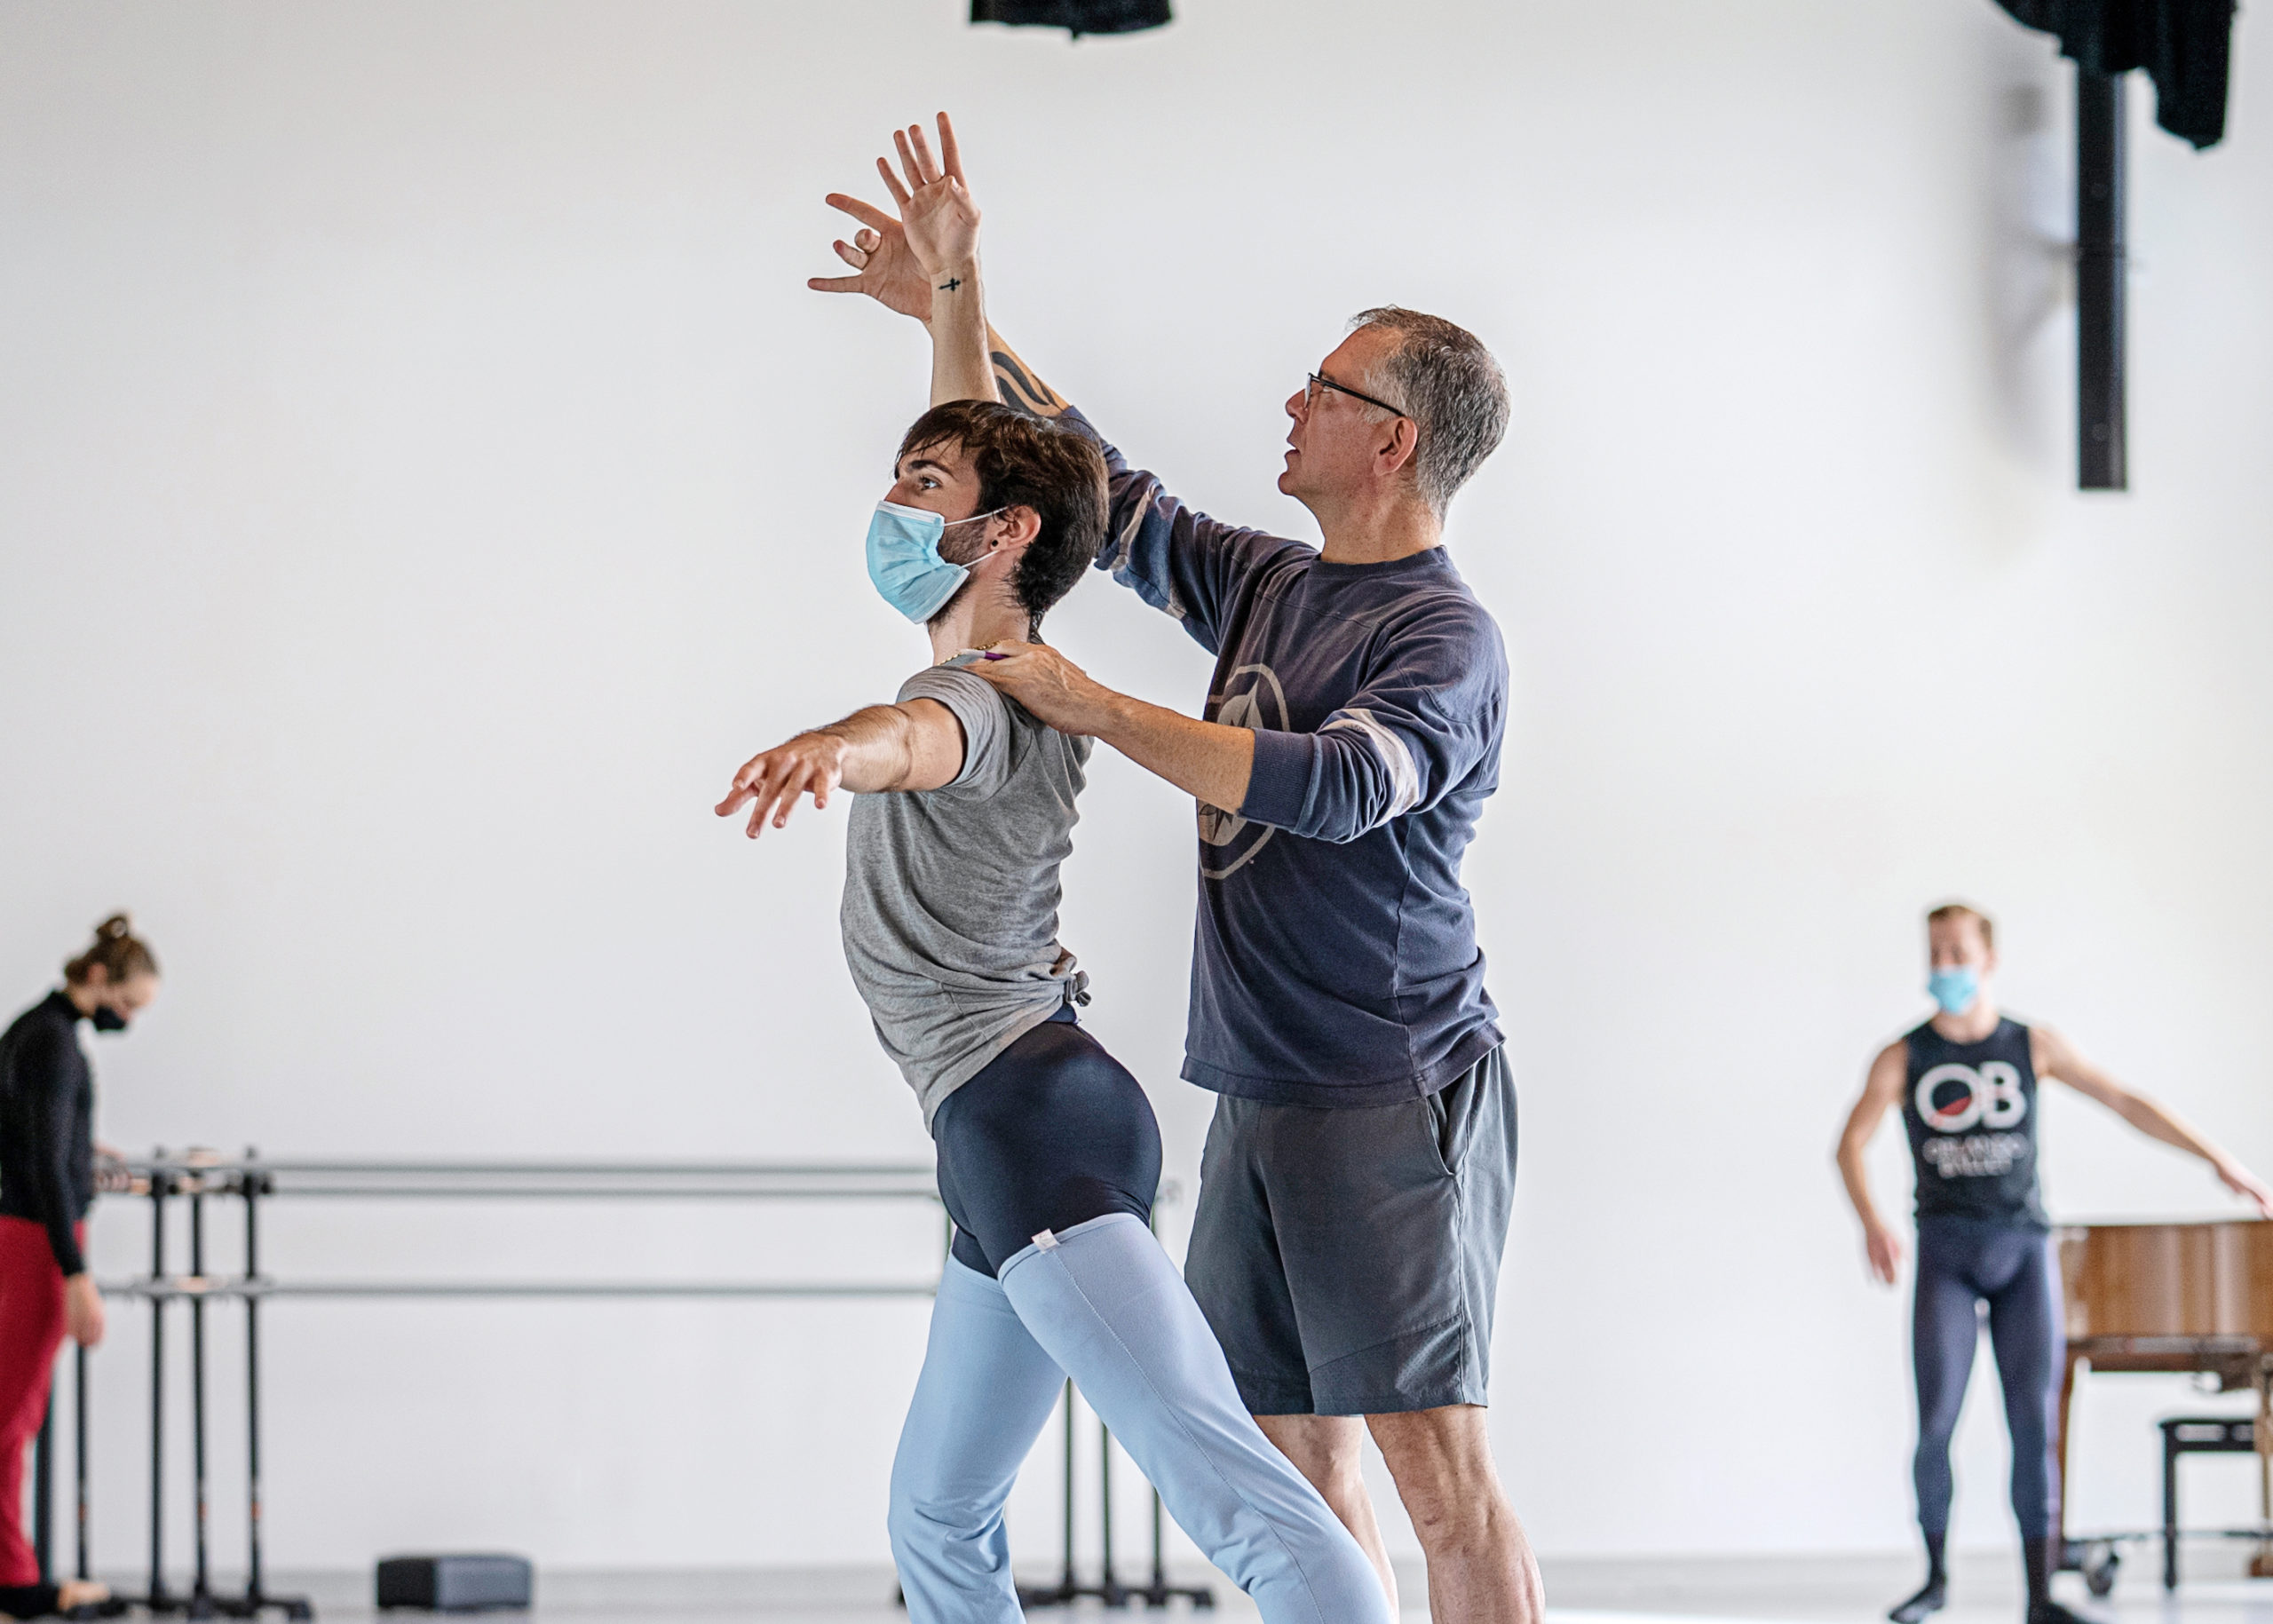 In a large dance studio, Jorden Morris, wearing a long-sleeved blue T-shirt and gray shorts, stands behind dancer Jaysan Stinnett and places his left hand on his shoulder while adjusting the dancer's raised right arm. Stinnett poses in an open fourth position and wears a face mask, gray T-shirt, black tights and blue, thigh-length leg warmers.